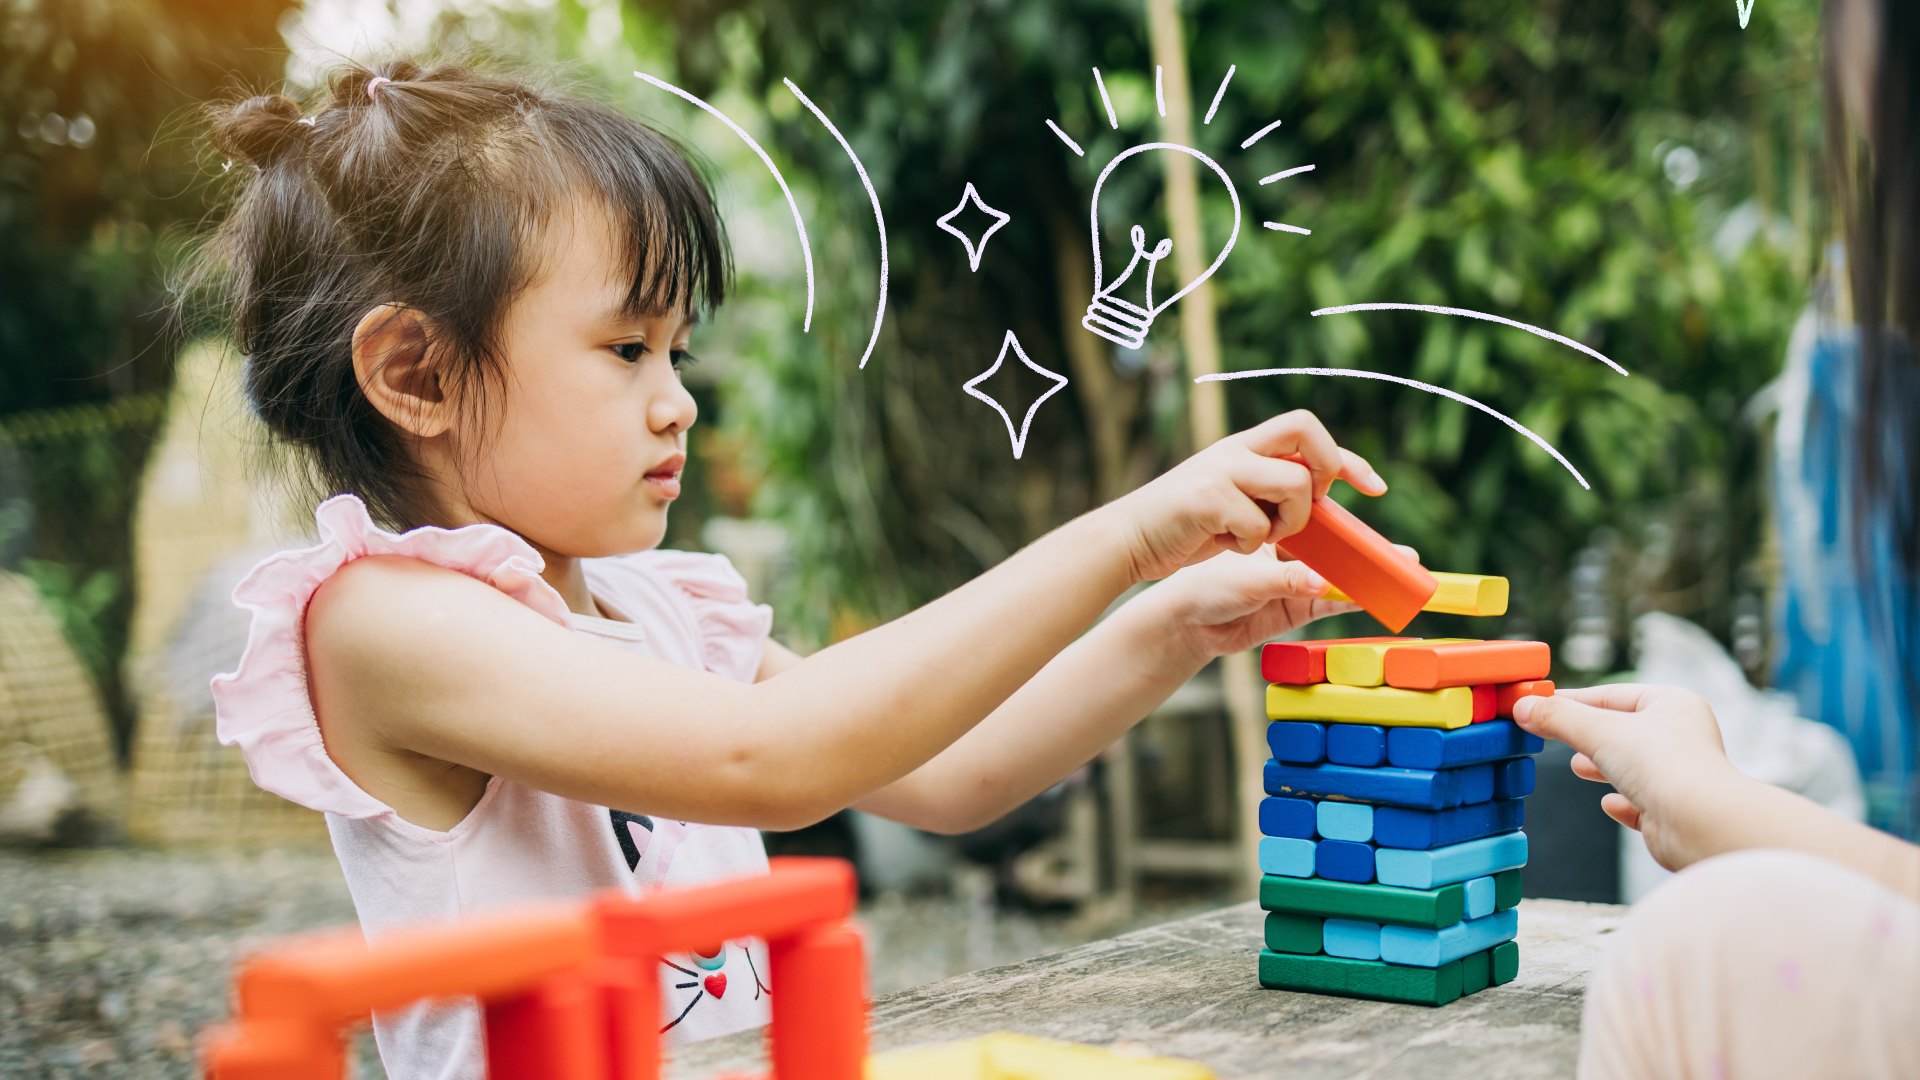 15 Games for Toddlers that Encourage Creative Thinking